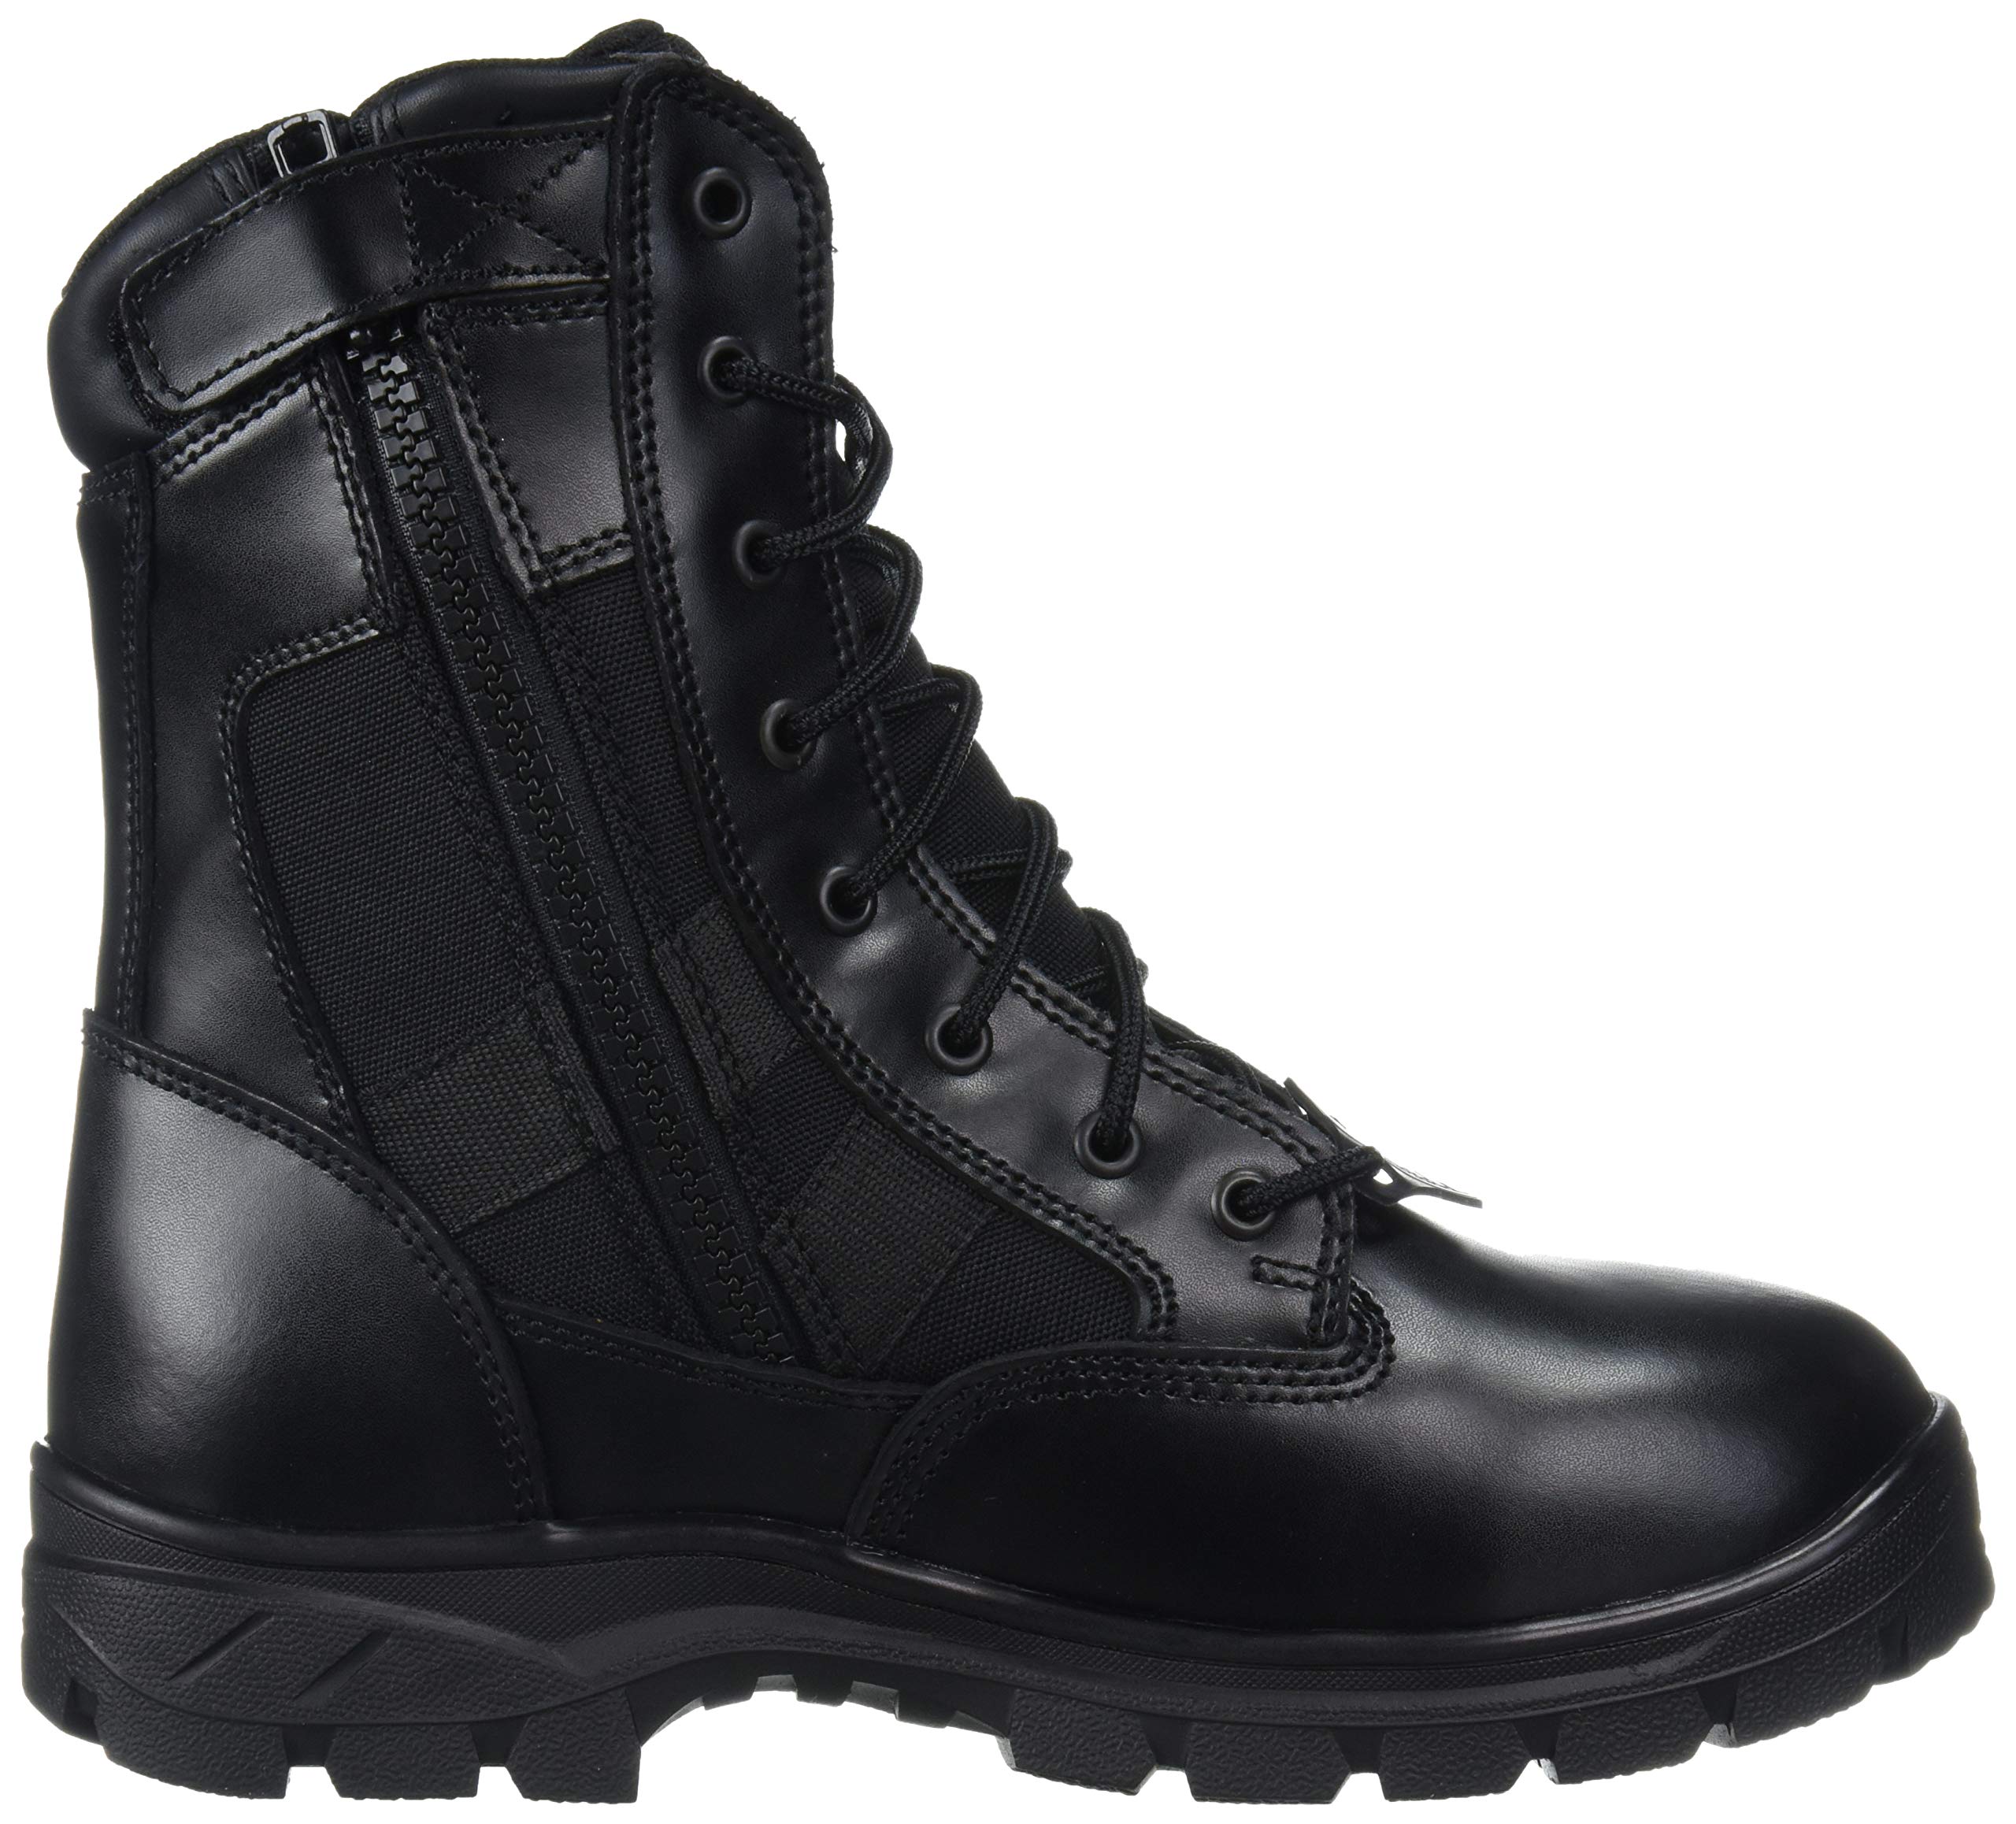 Skechers Men's Wascana-athas Military and Tactical Boot